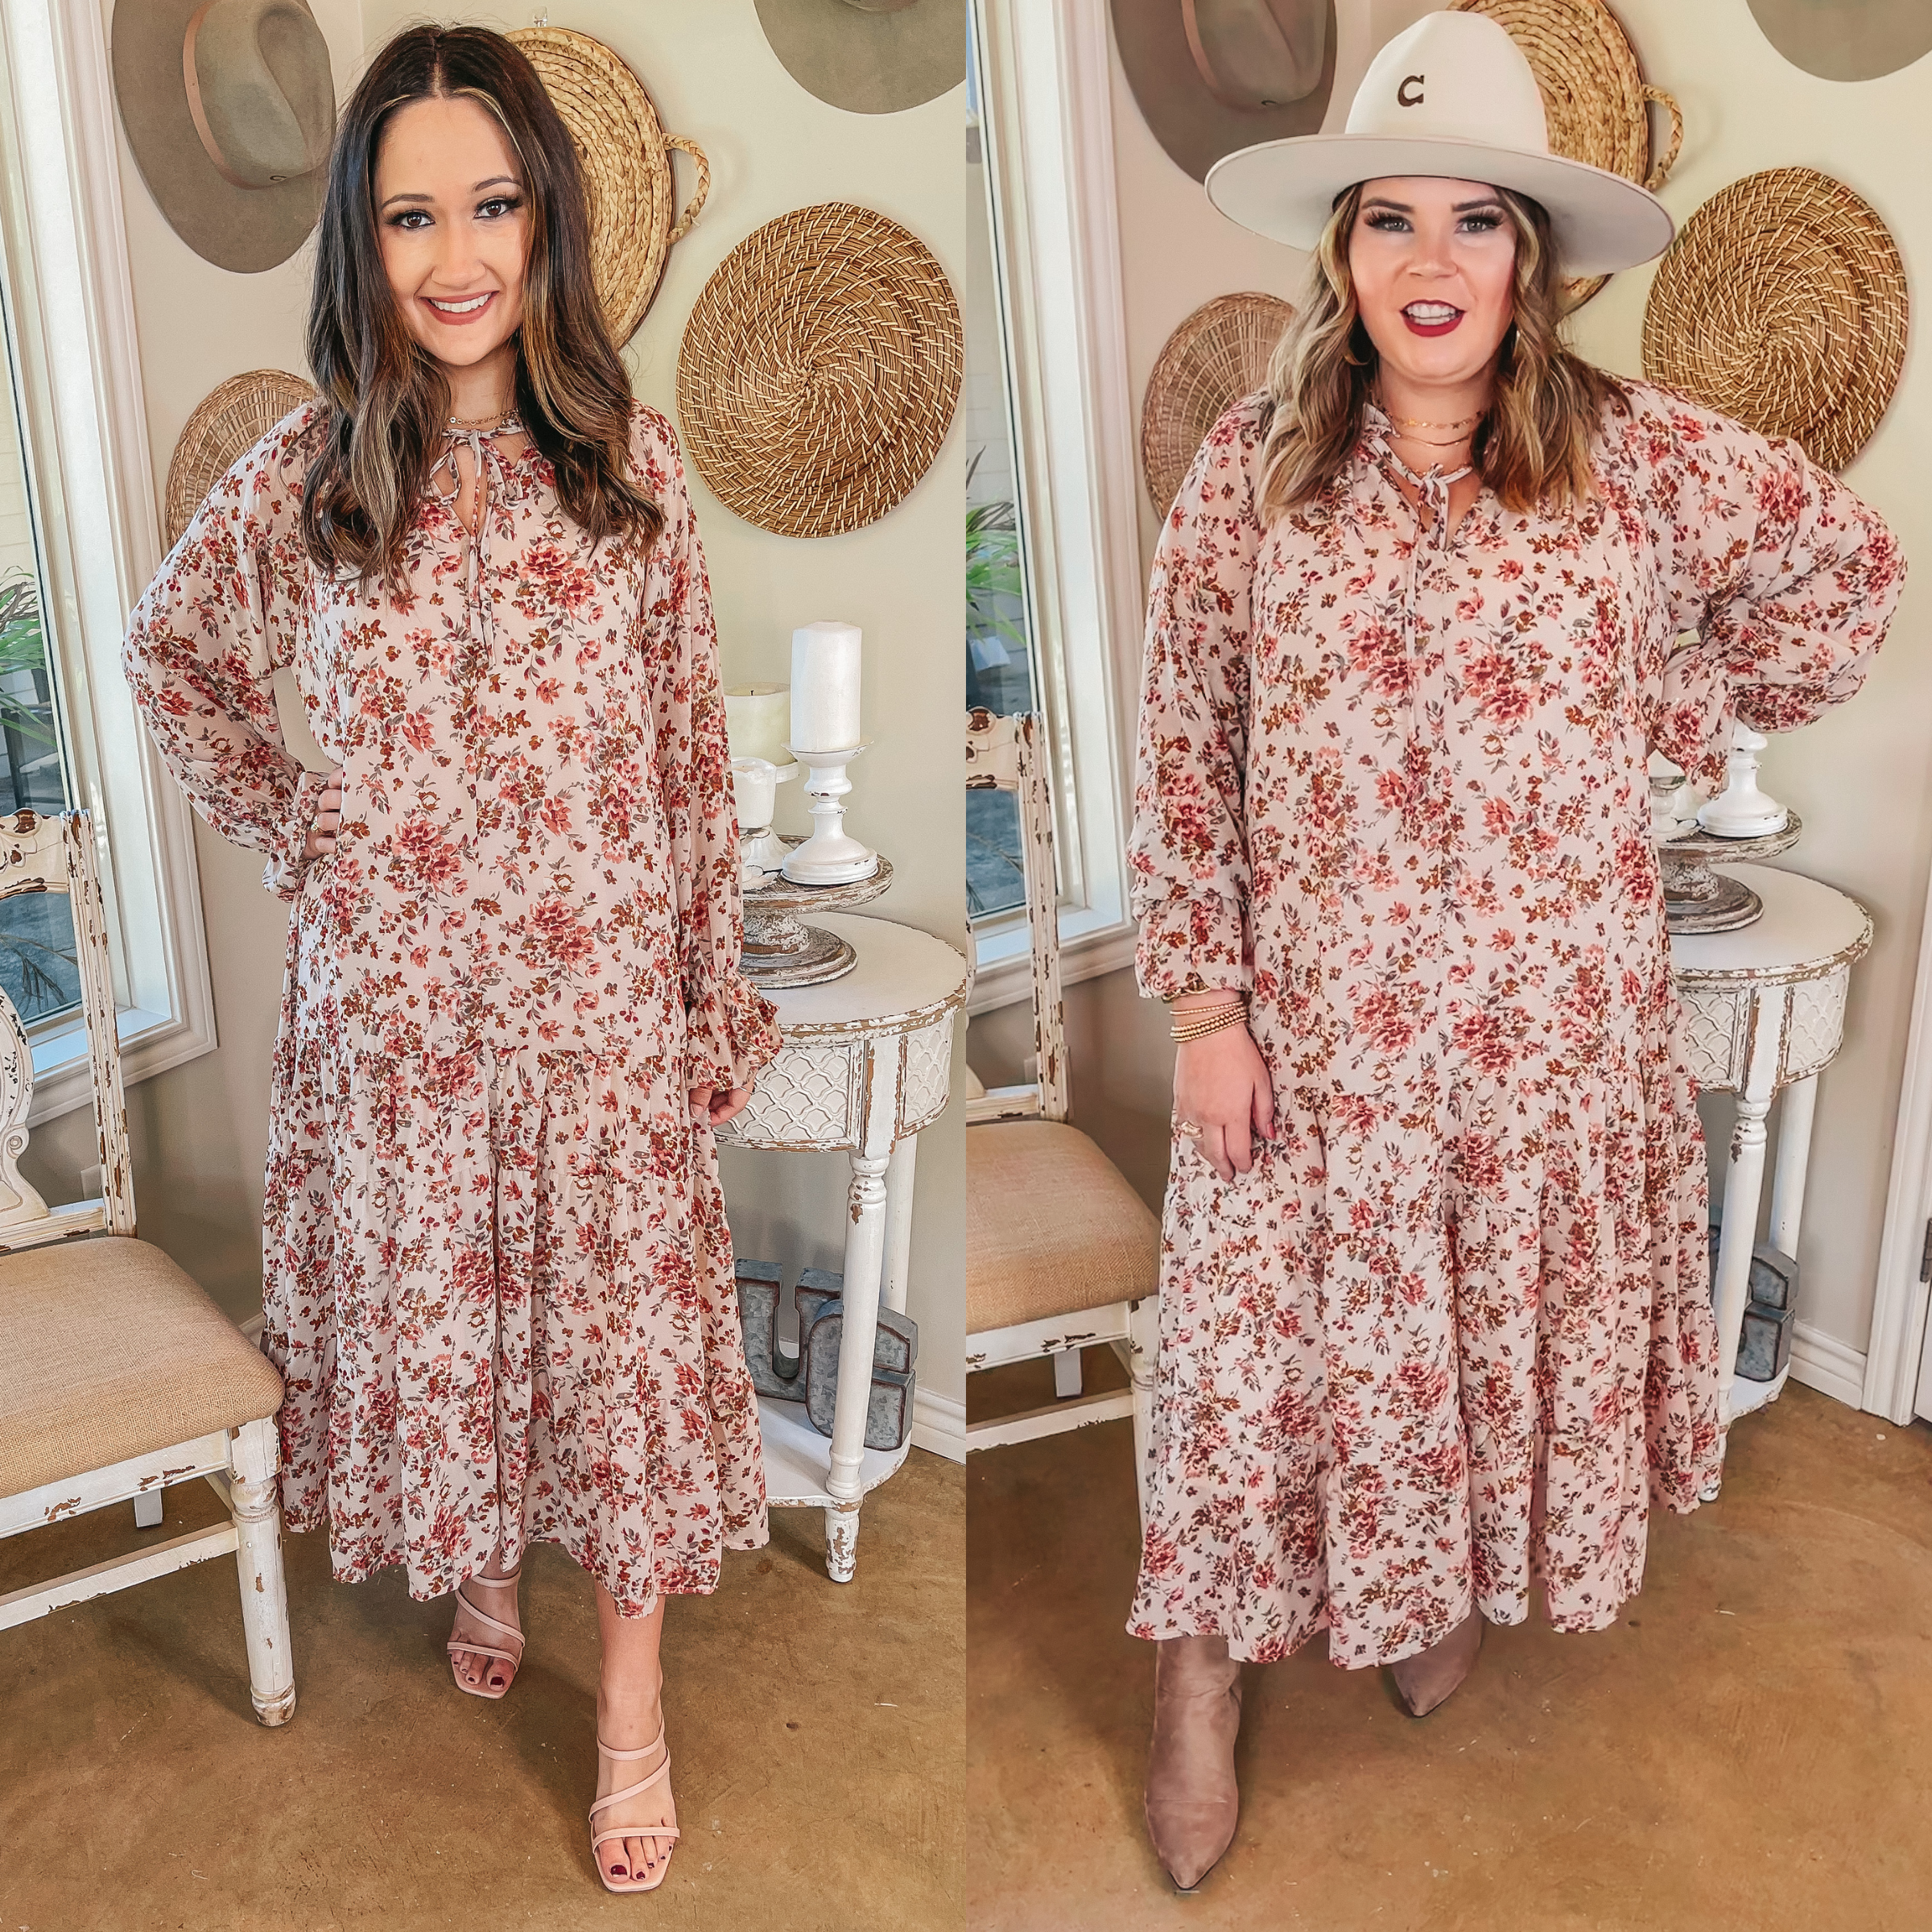 Tuscan Nights Long Sleeve High Neck Floral Midi Dress in Ivory - Giddy Up Glamour Boutique